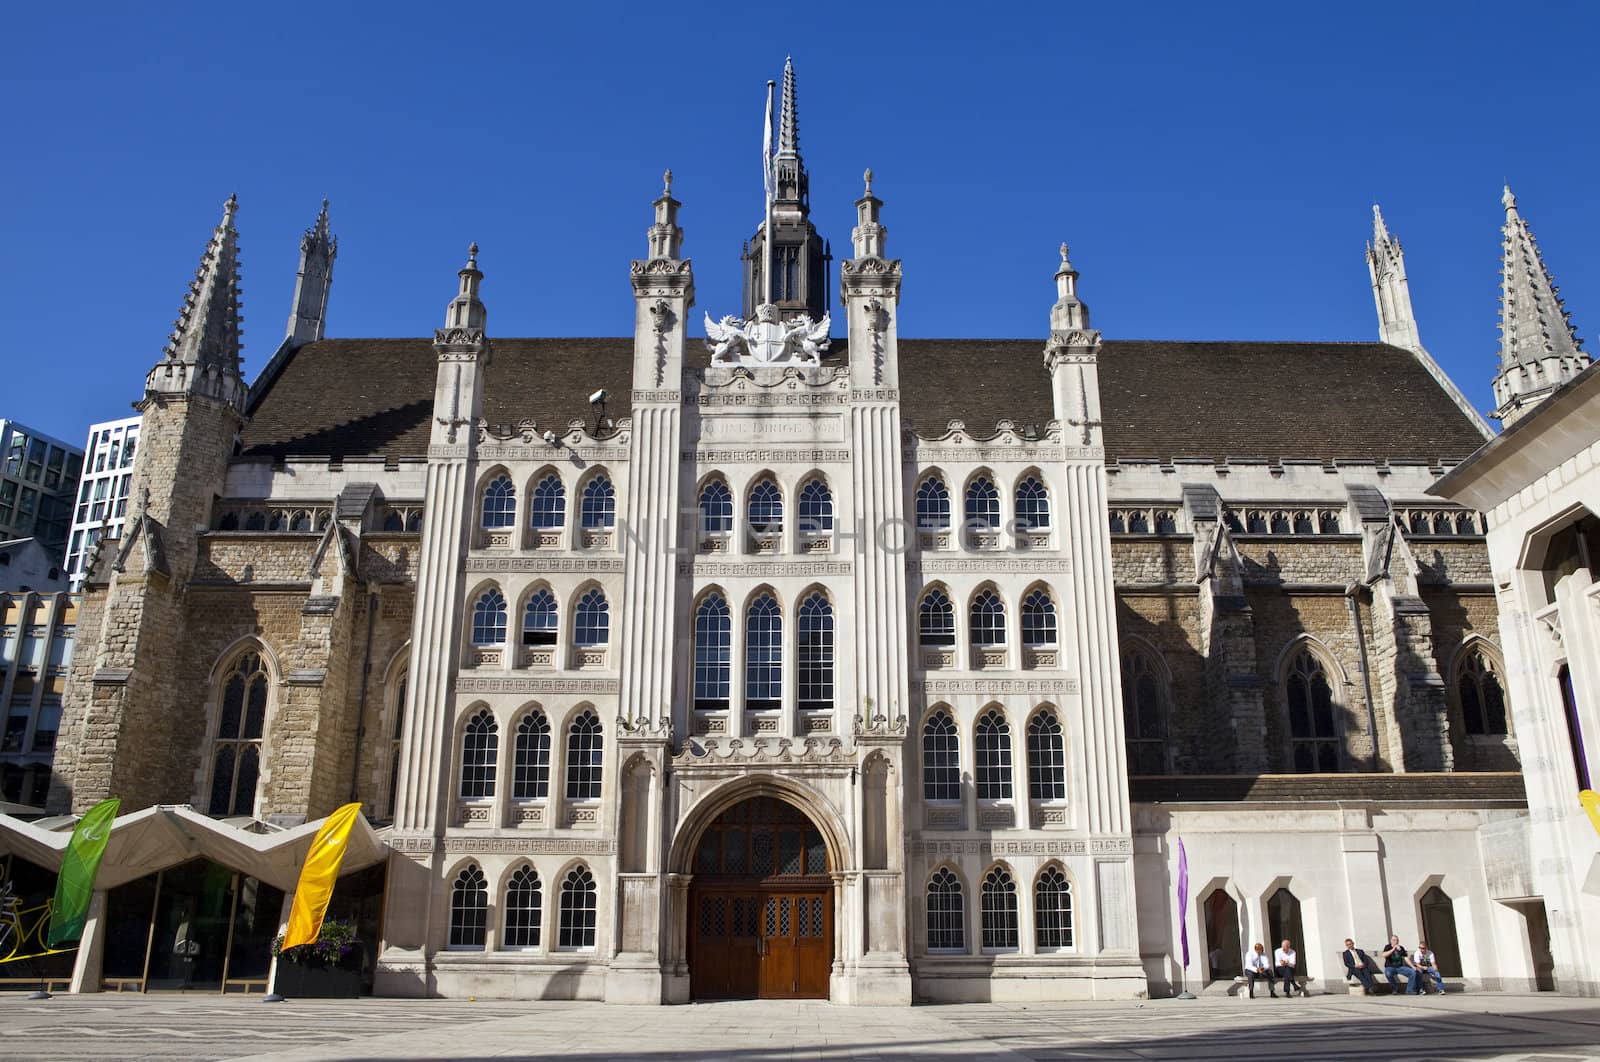 The Guildhall in London by chrisdorney